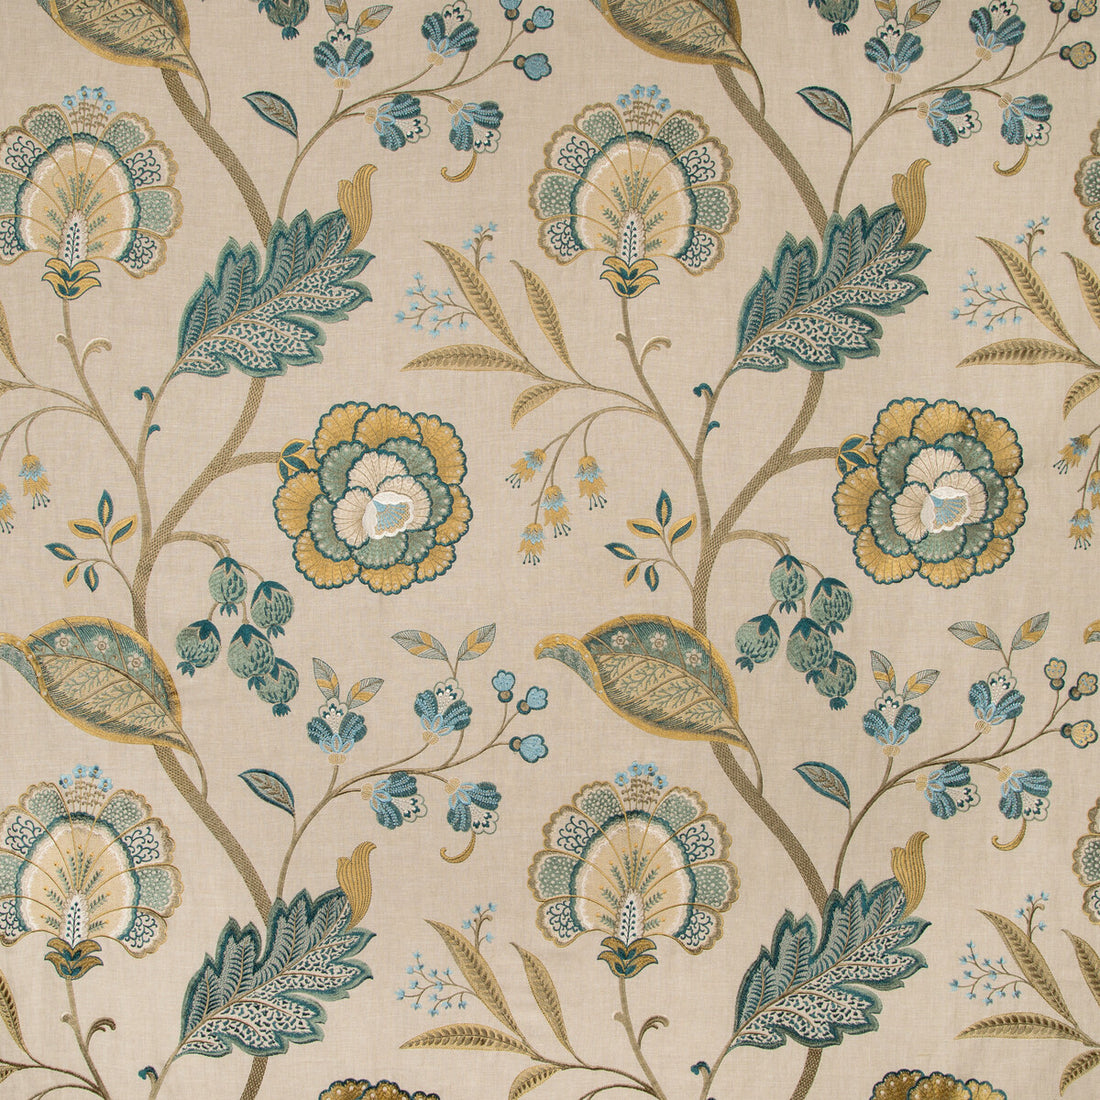 Aston Embroidery fabric in teal color - pattern 2019100.113.0 - by Lee Jofa in the Manor House collection